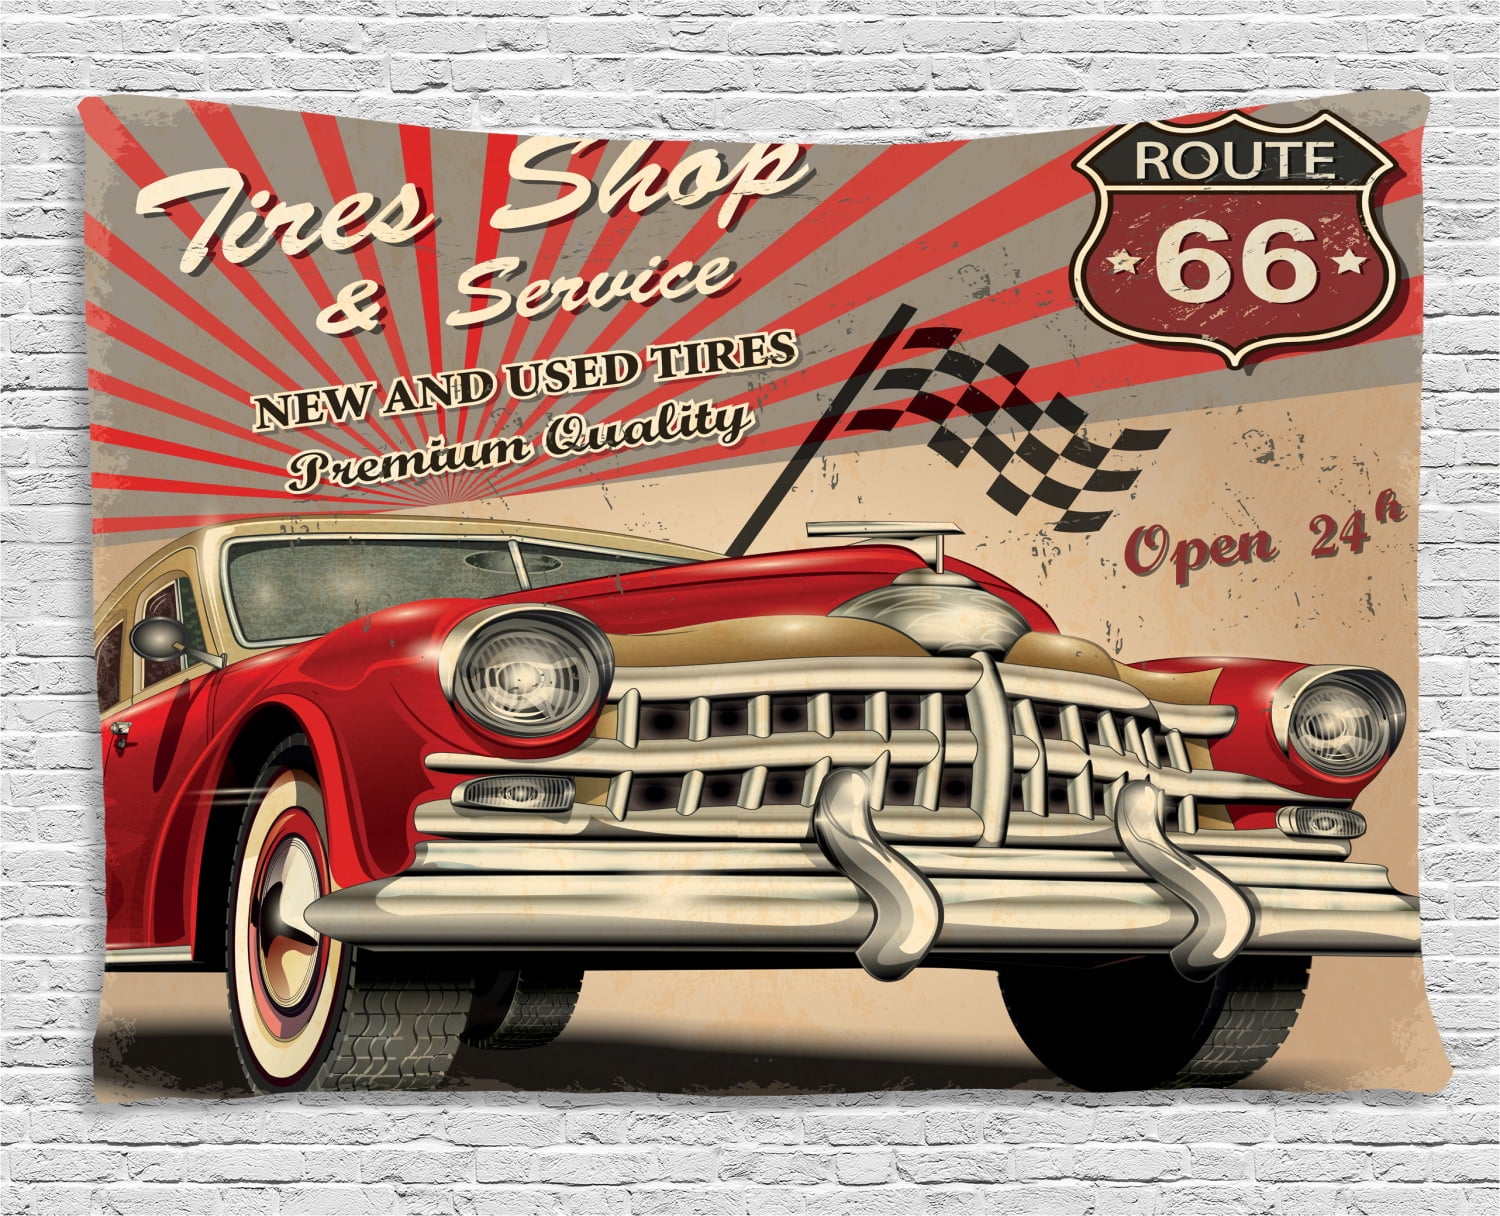 Cars Tapestry, Tires Shop and Service Route 66 Emblem Advertisement ...